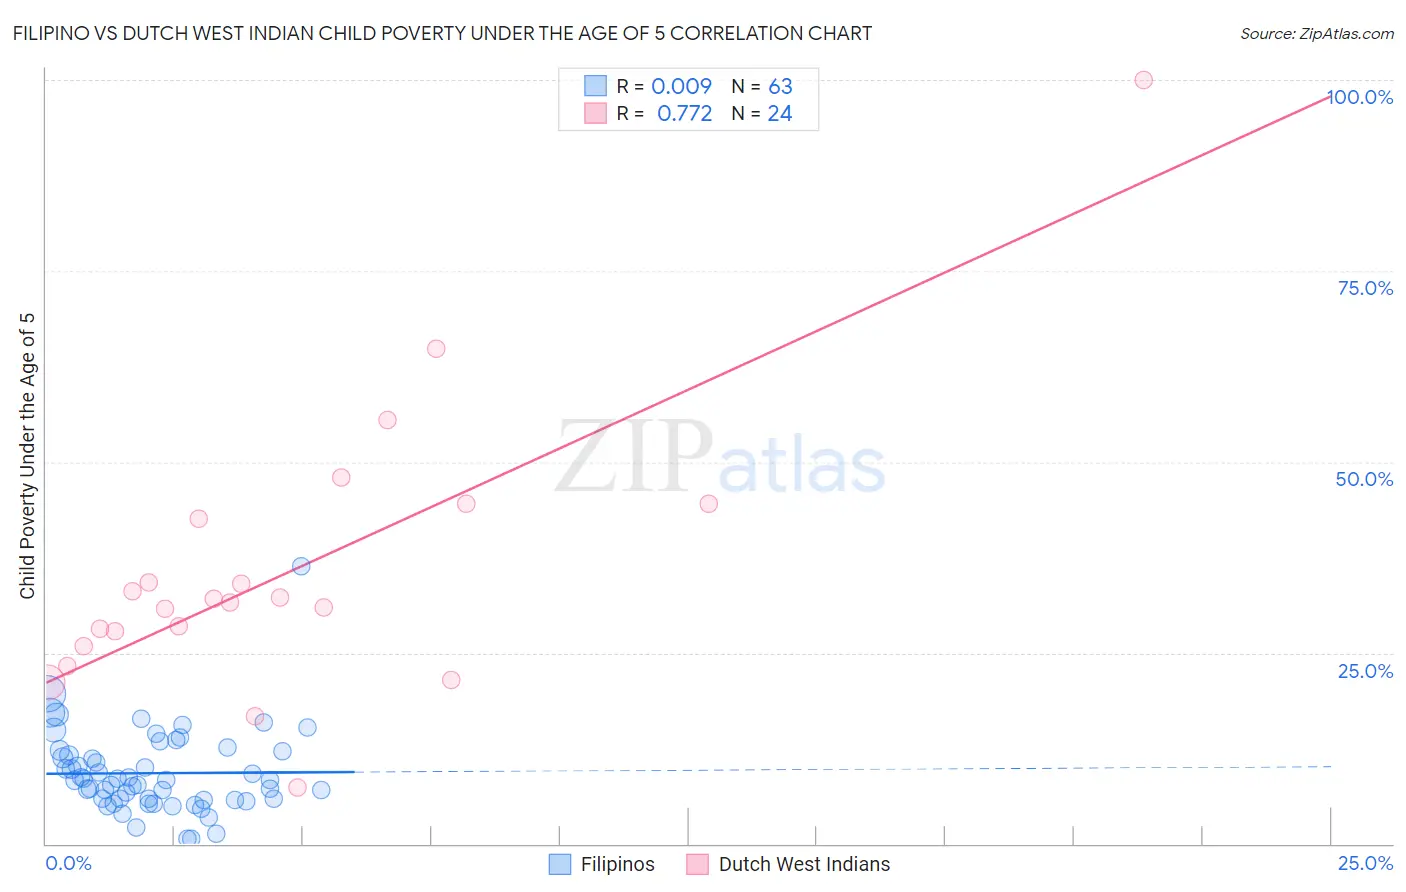 Filipino vs Dutch West Indian Child Poverty Under the Age of 5